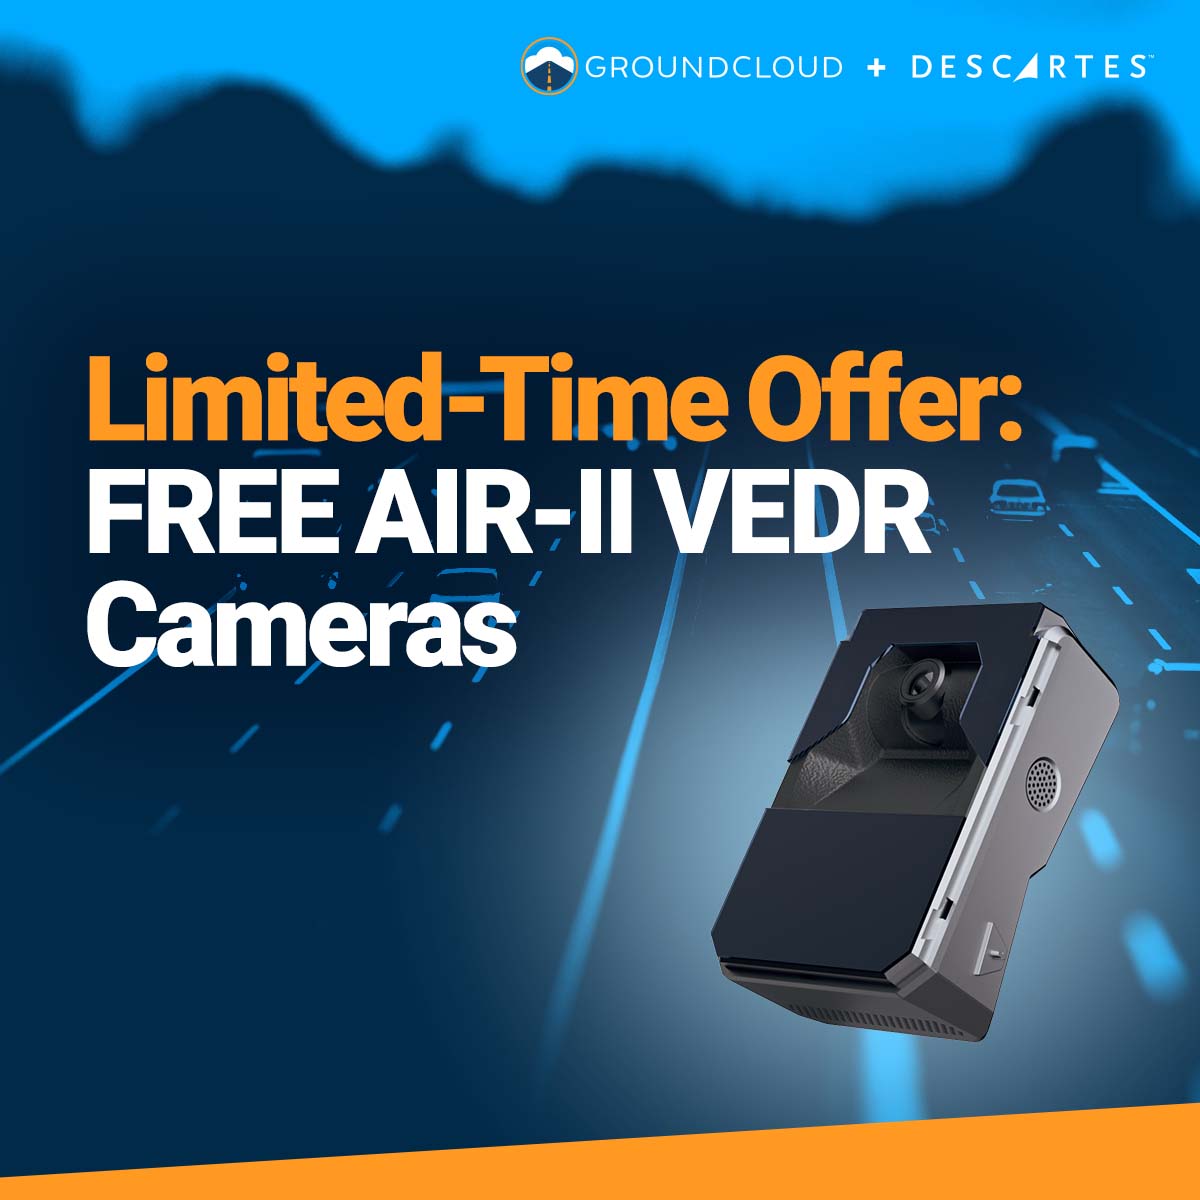 Advertisement for a limited-time offer on free AIR-II MV+AI VEDR cameras. Image shows a camera and a night highway with trucks.